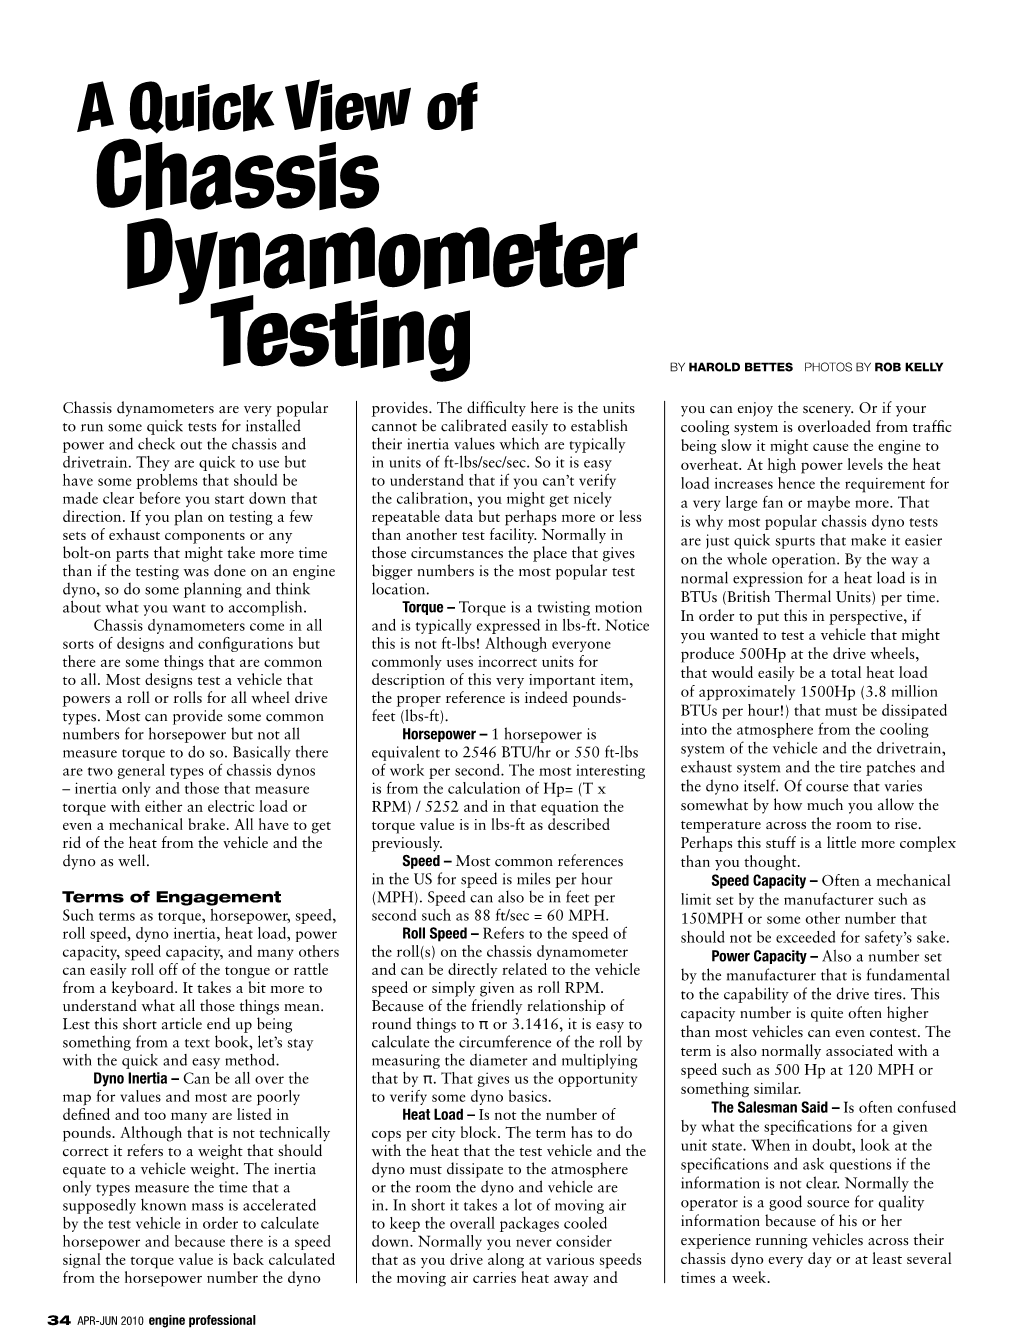 Understanding Chassis Dynamometer Testing